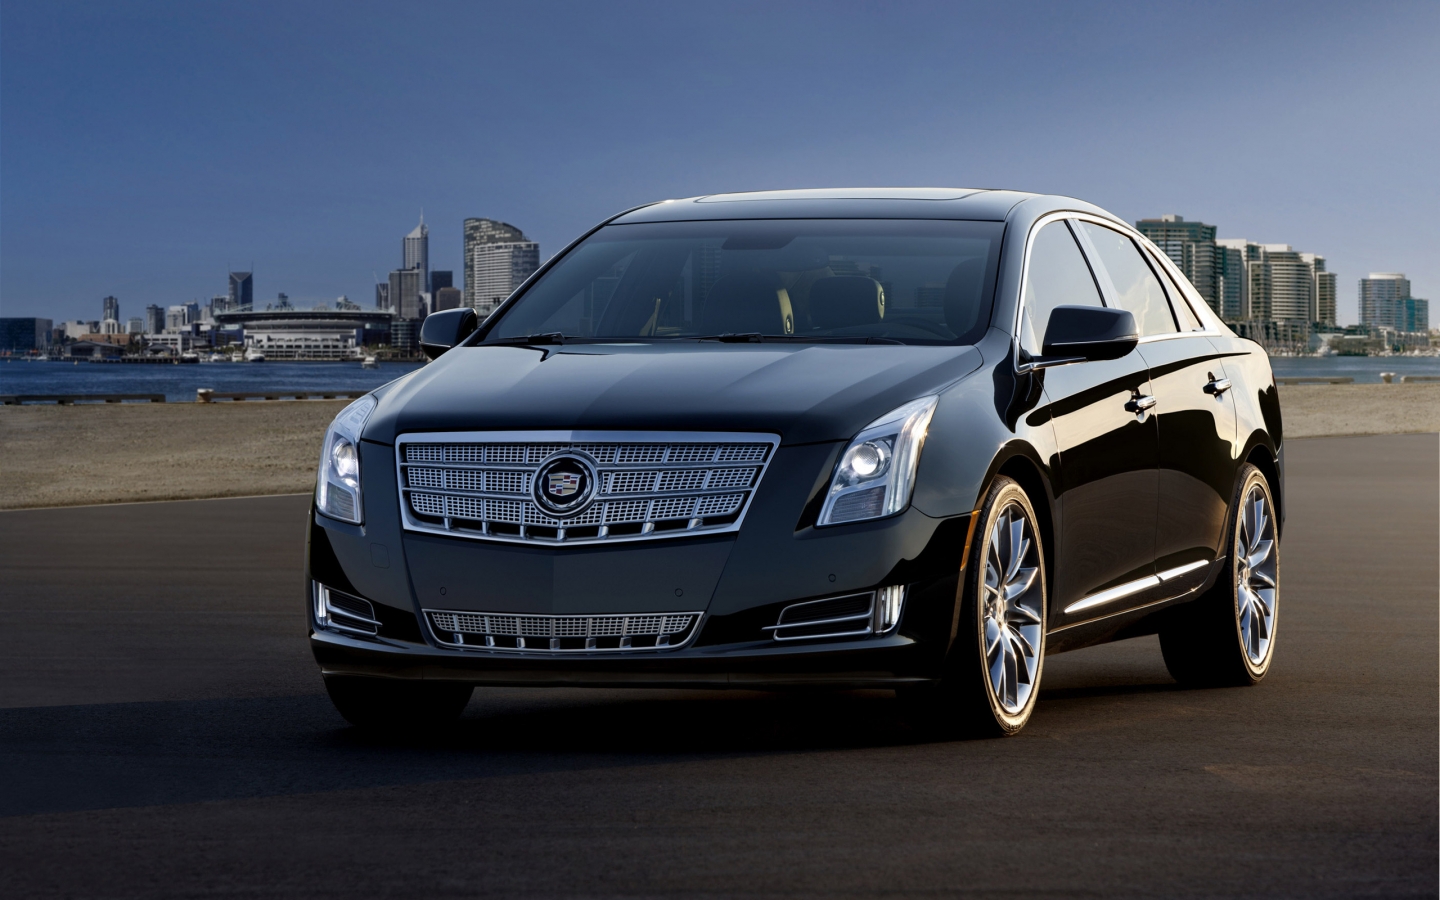 2013 Cadillac XTS for 1440 x 900 widescreen resolution